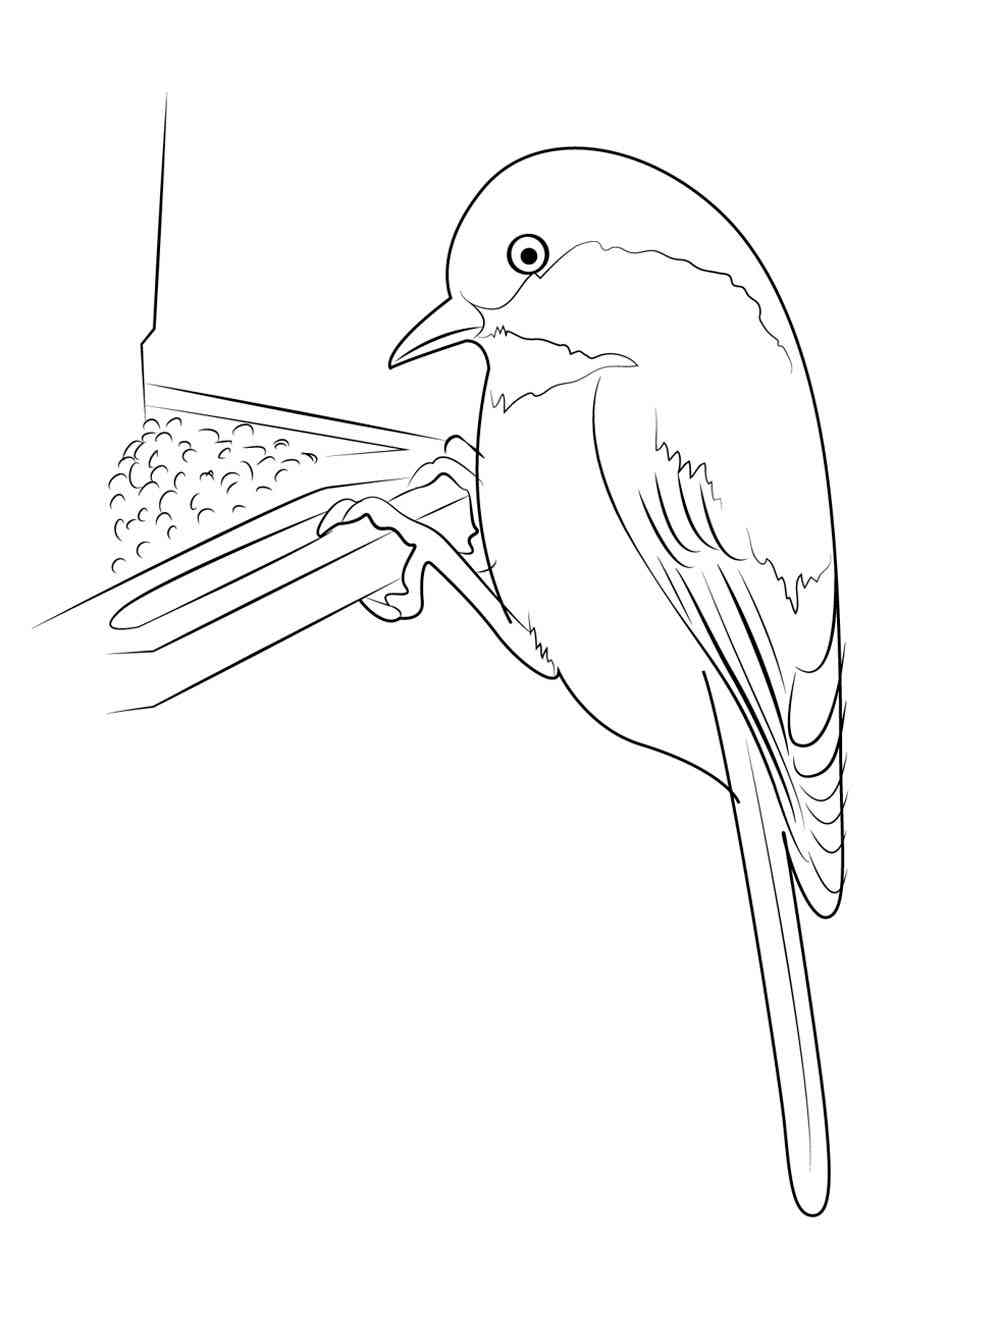 Chickadee eating from a feeder coloring page